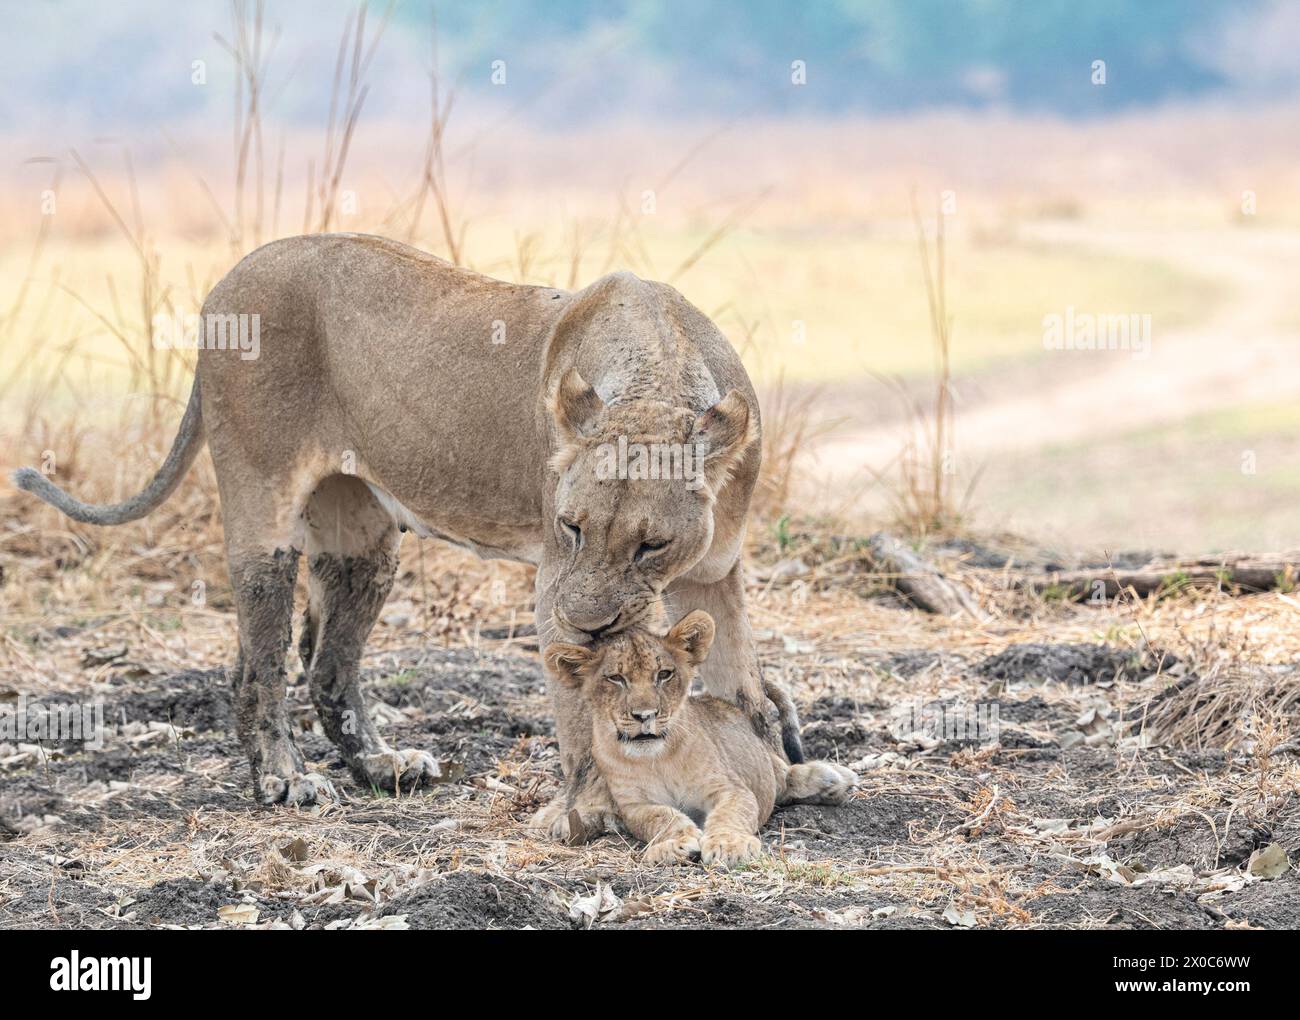 Cub enjoying his grooming session     ZAMBIA ADORABLE images of a lioness showering her little one with affection were captured in South Luangwa Natio Stock Photo